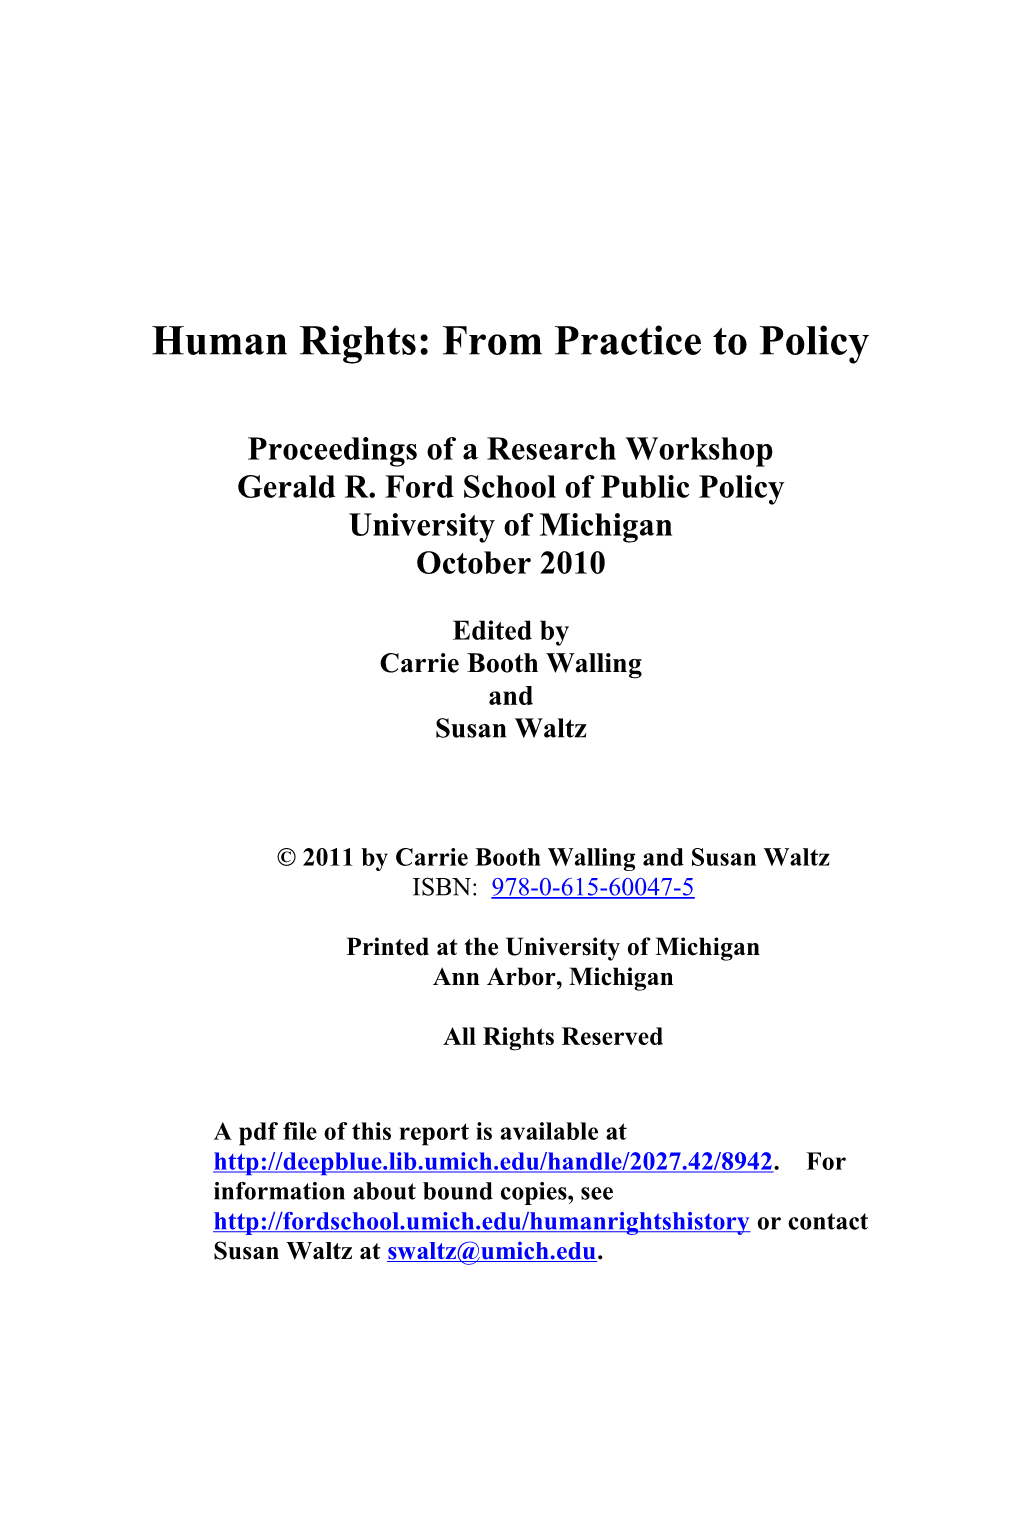 Human Rights: from Practice to Policy